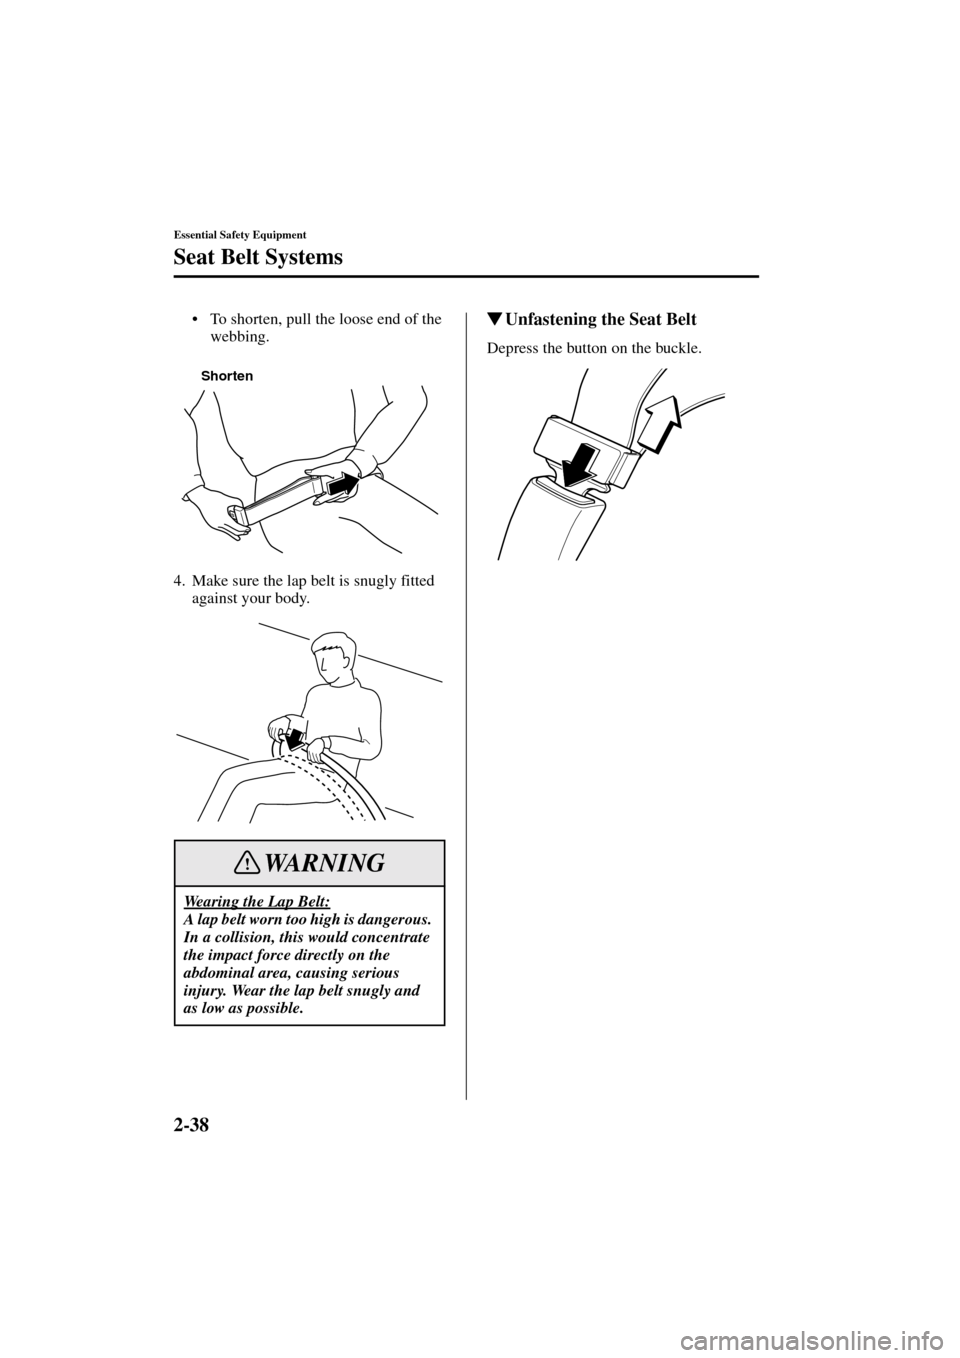 MAZDA MODEL MPV 2004   (in English) Service Manual 2-38
Essential Safety Equipment
Seat Belt Systems
Form No. 8S06-EA-03H
To shorten, pull the loose end of the 
webbing.
4. Make sure the lap belt is snugly fitted 
against your body.Unfastening the S